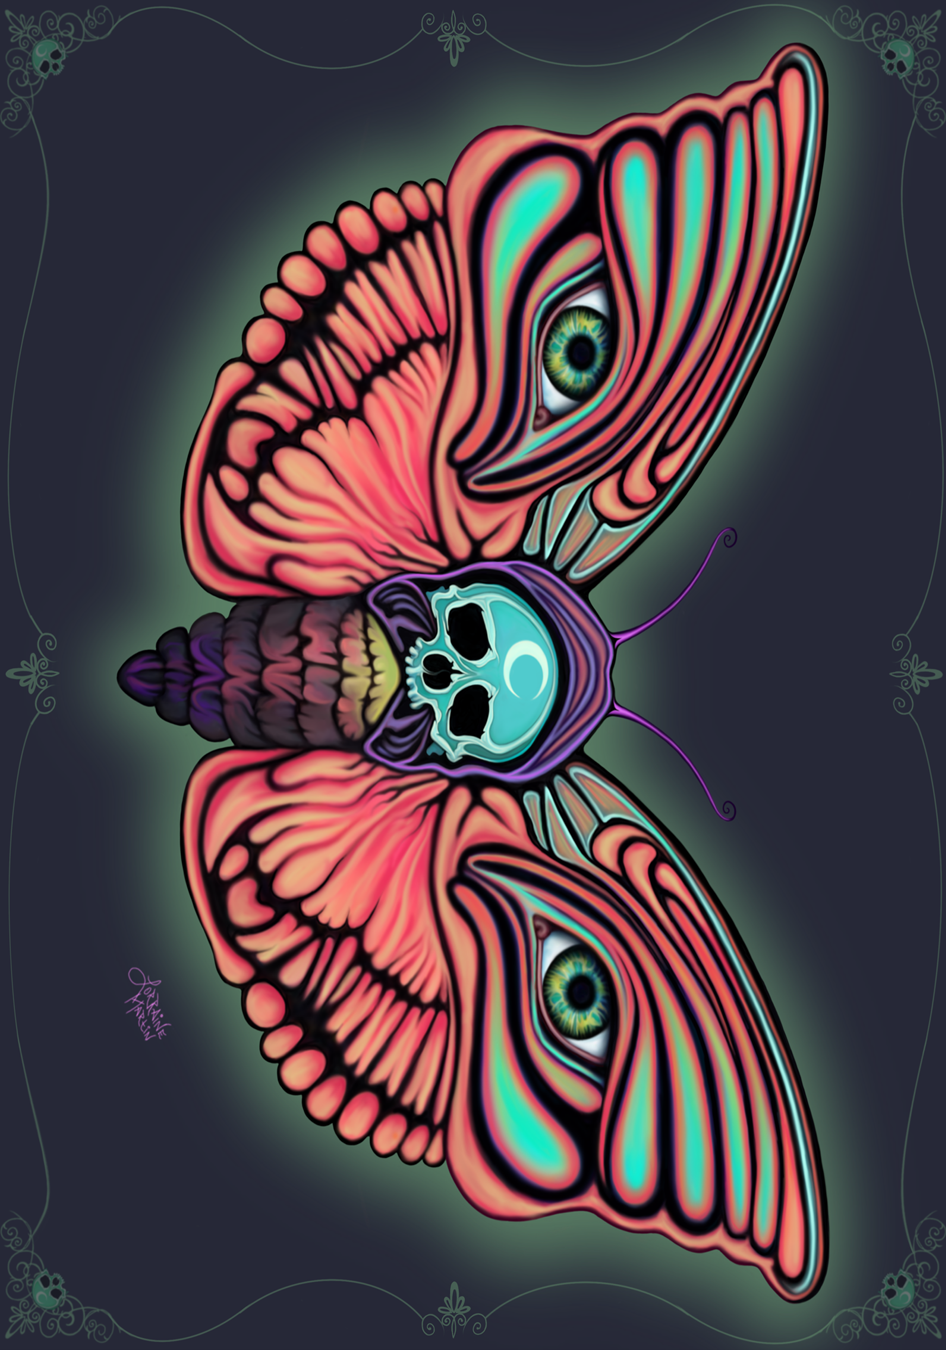 Psychedelic Moth Giclee Canvas Prints - The Butterfrog